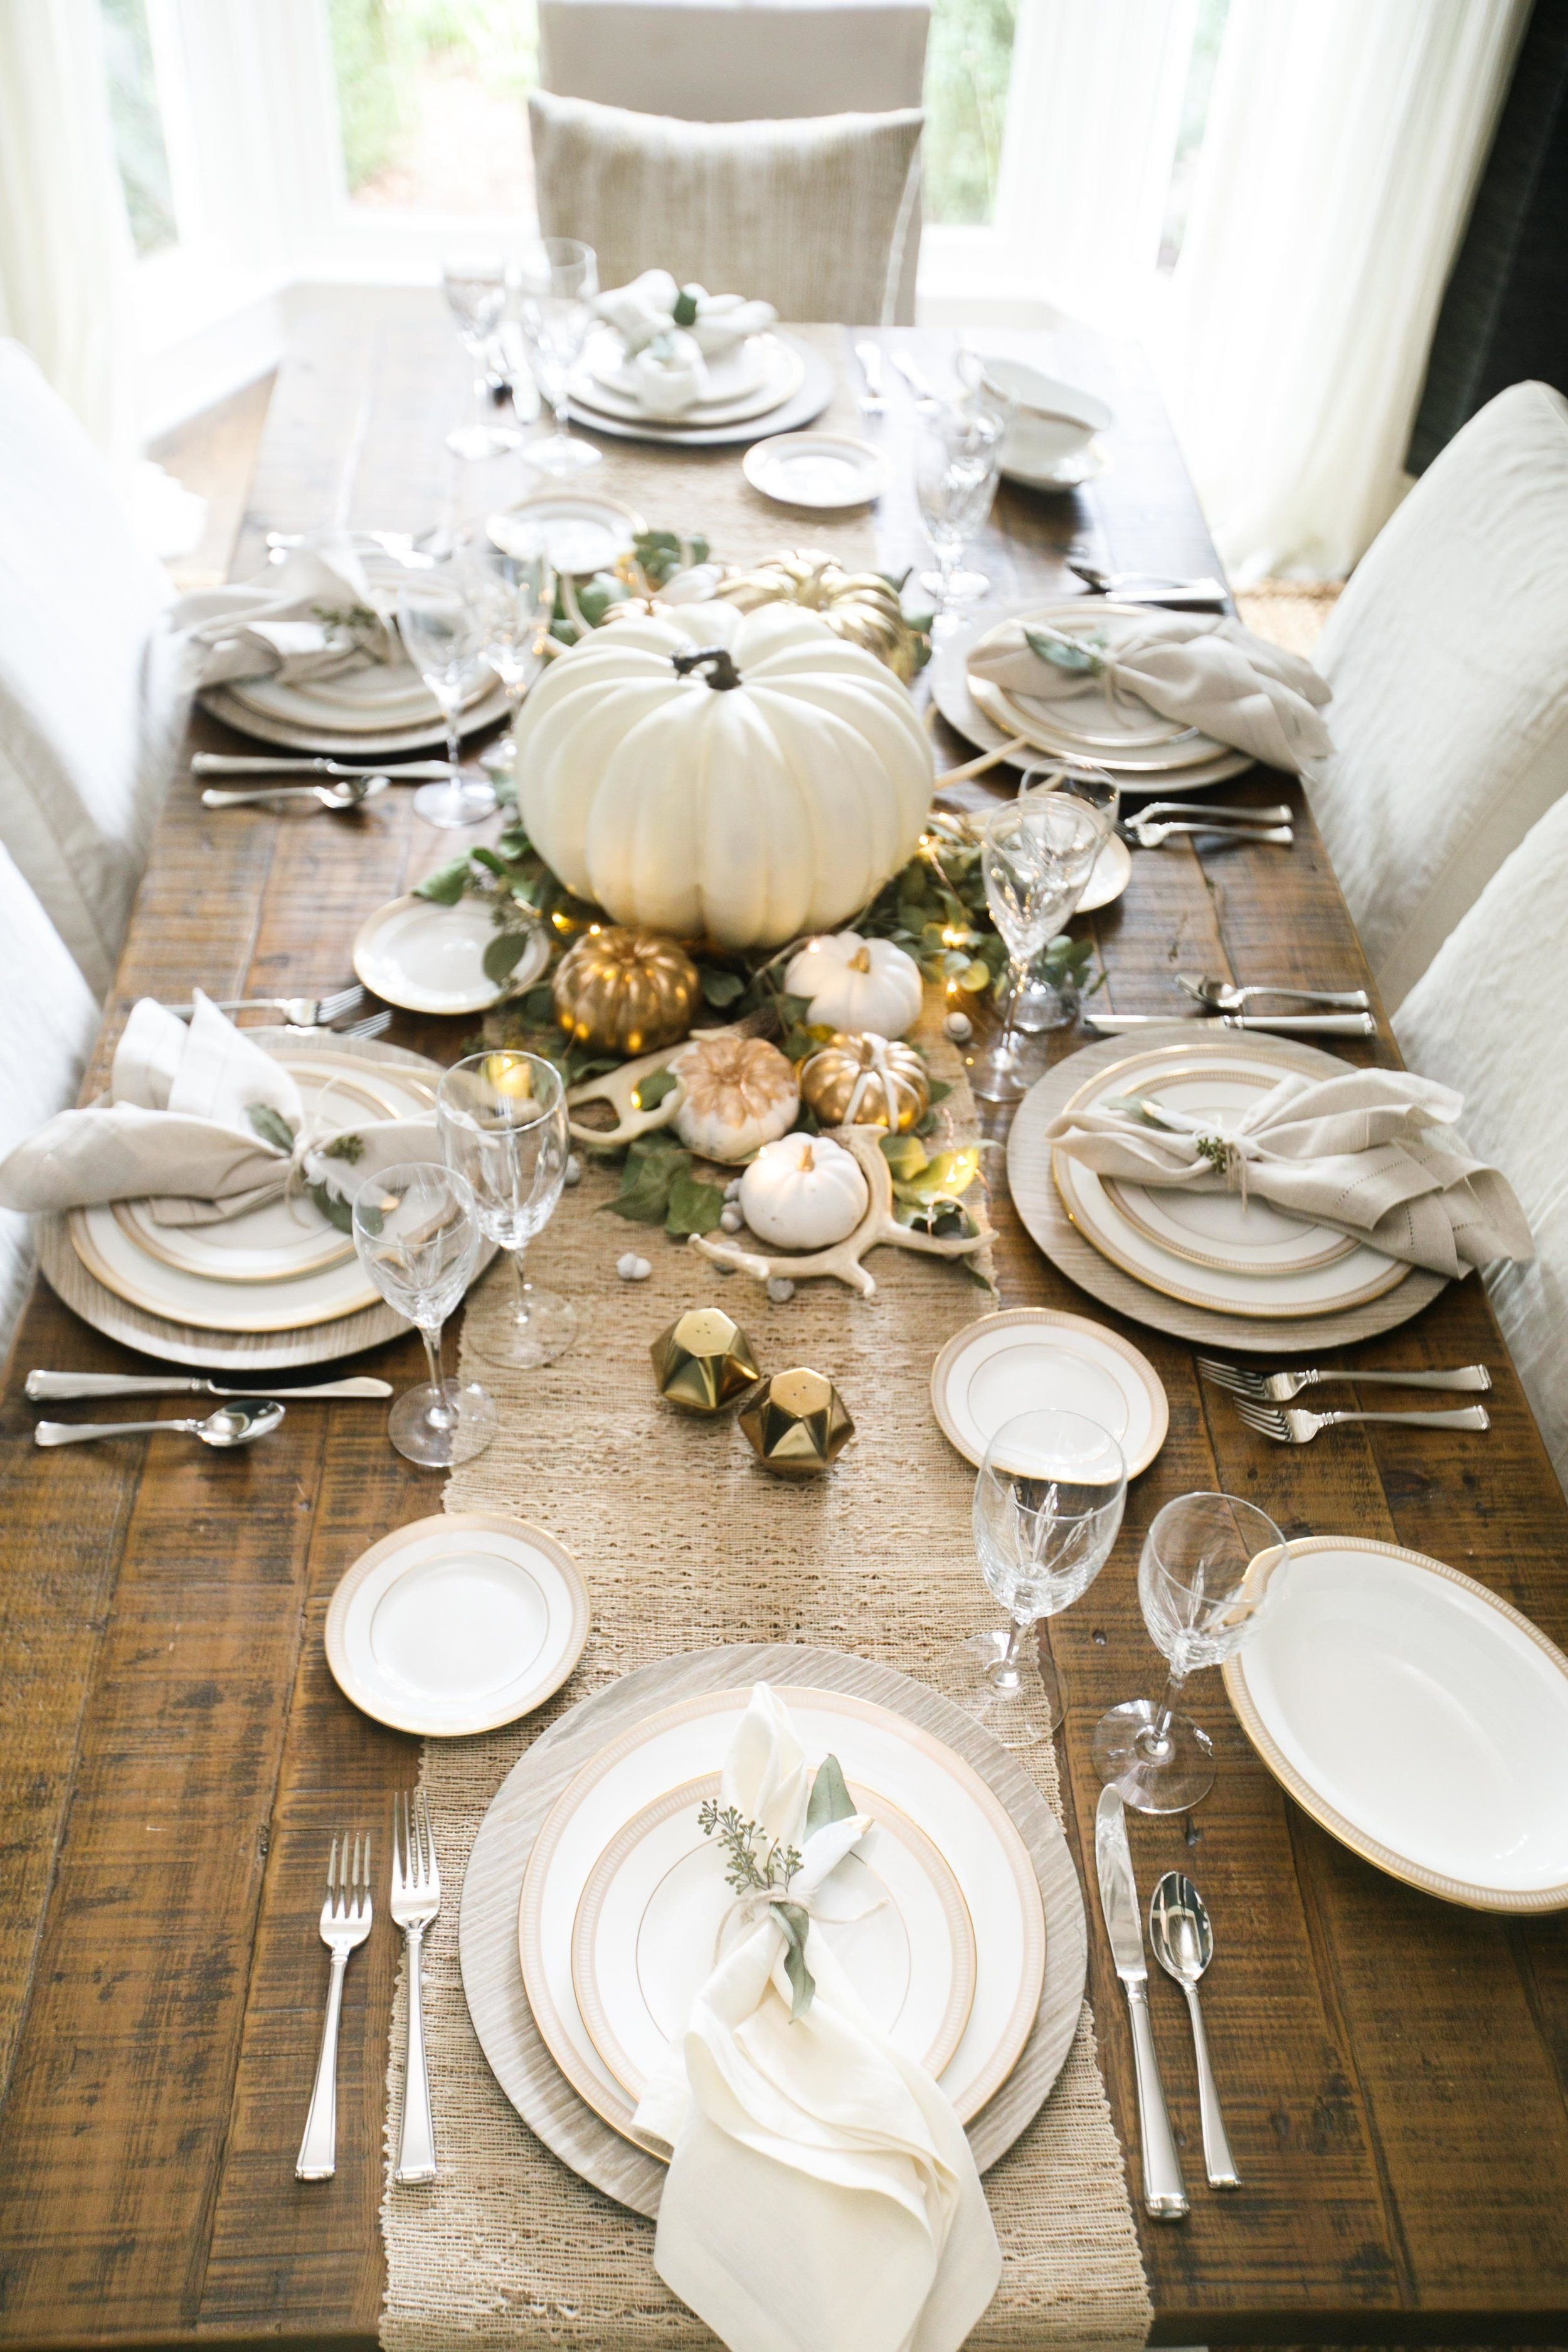 10 Stylish Thanksgiving Table Setting Ideas Pinterest chic thanksgiving table thanksgiving budgeting and create 2022